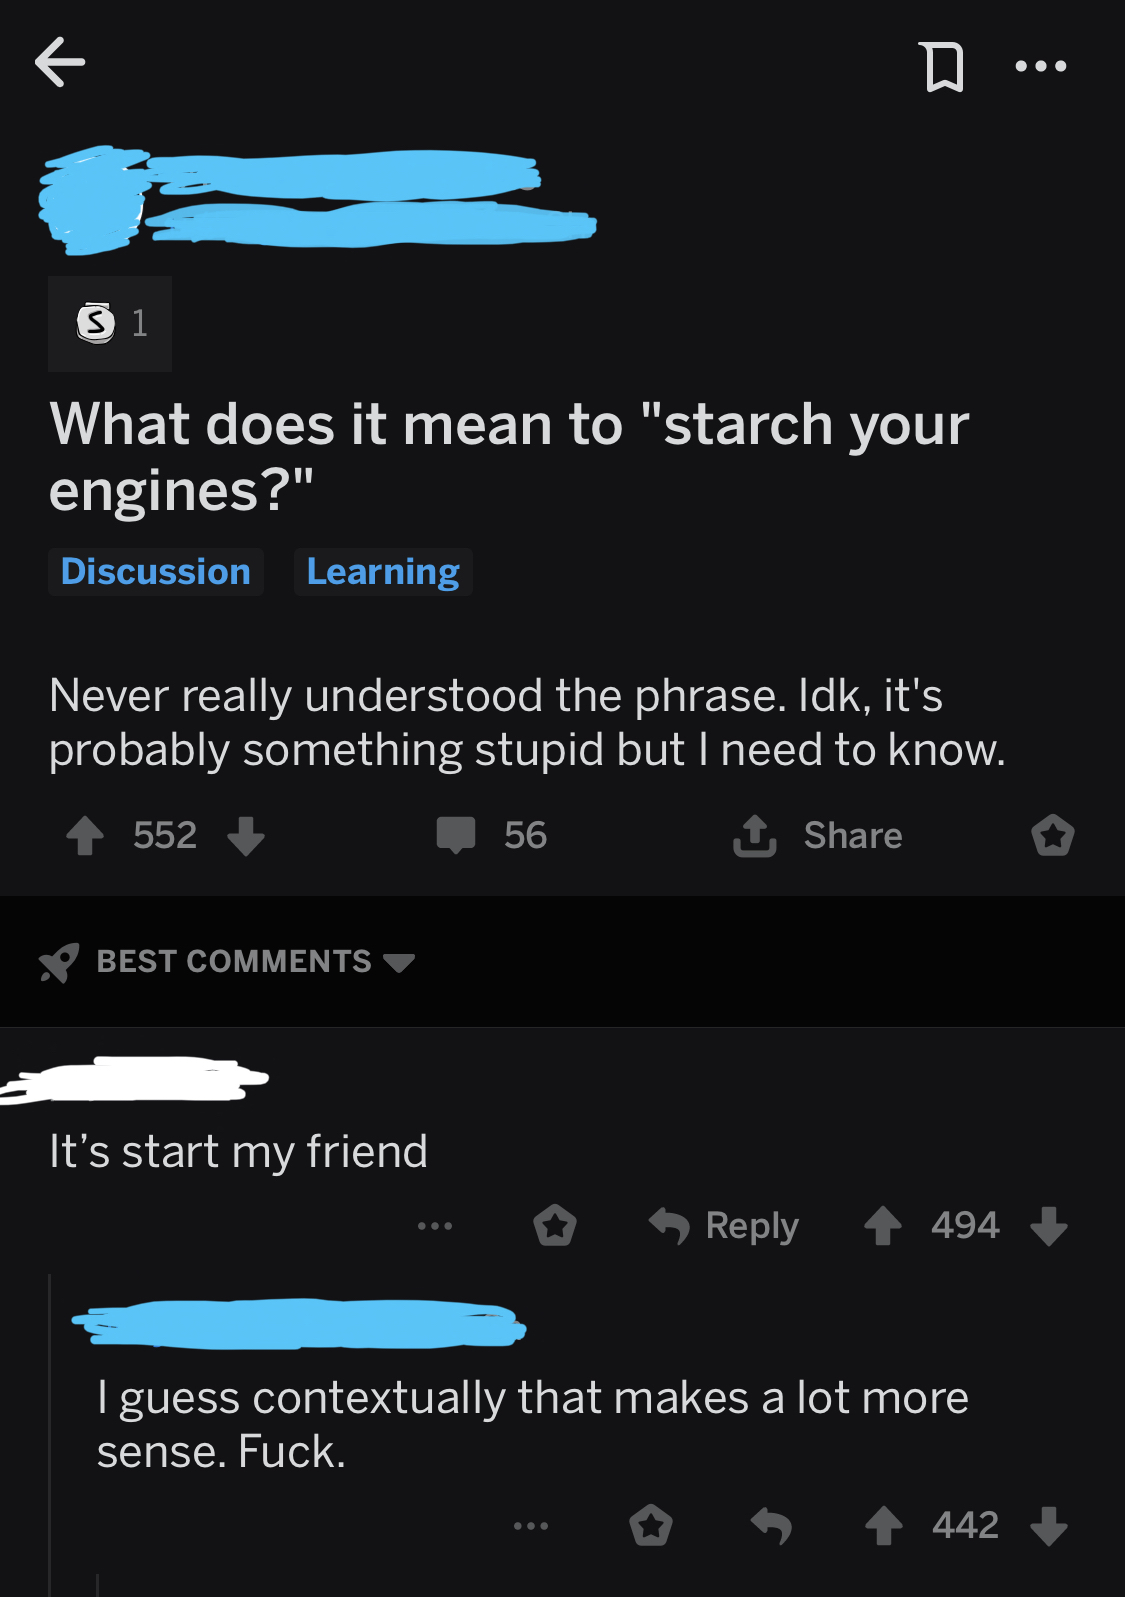 reddit post of someone asking what starch your engines means when they mean start your engines